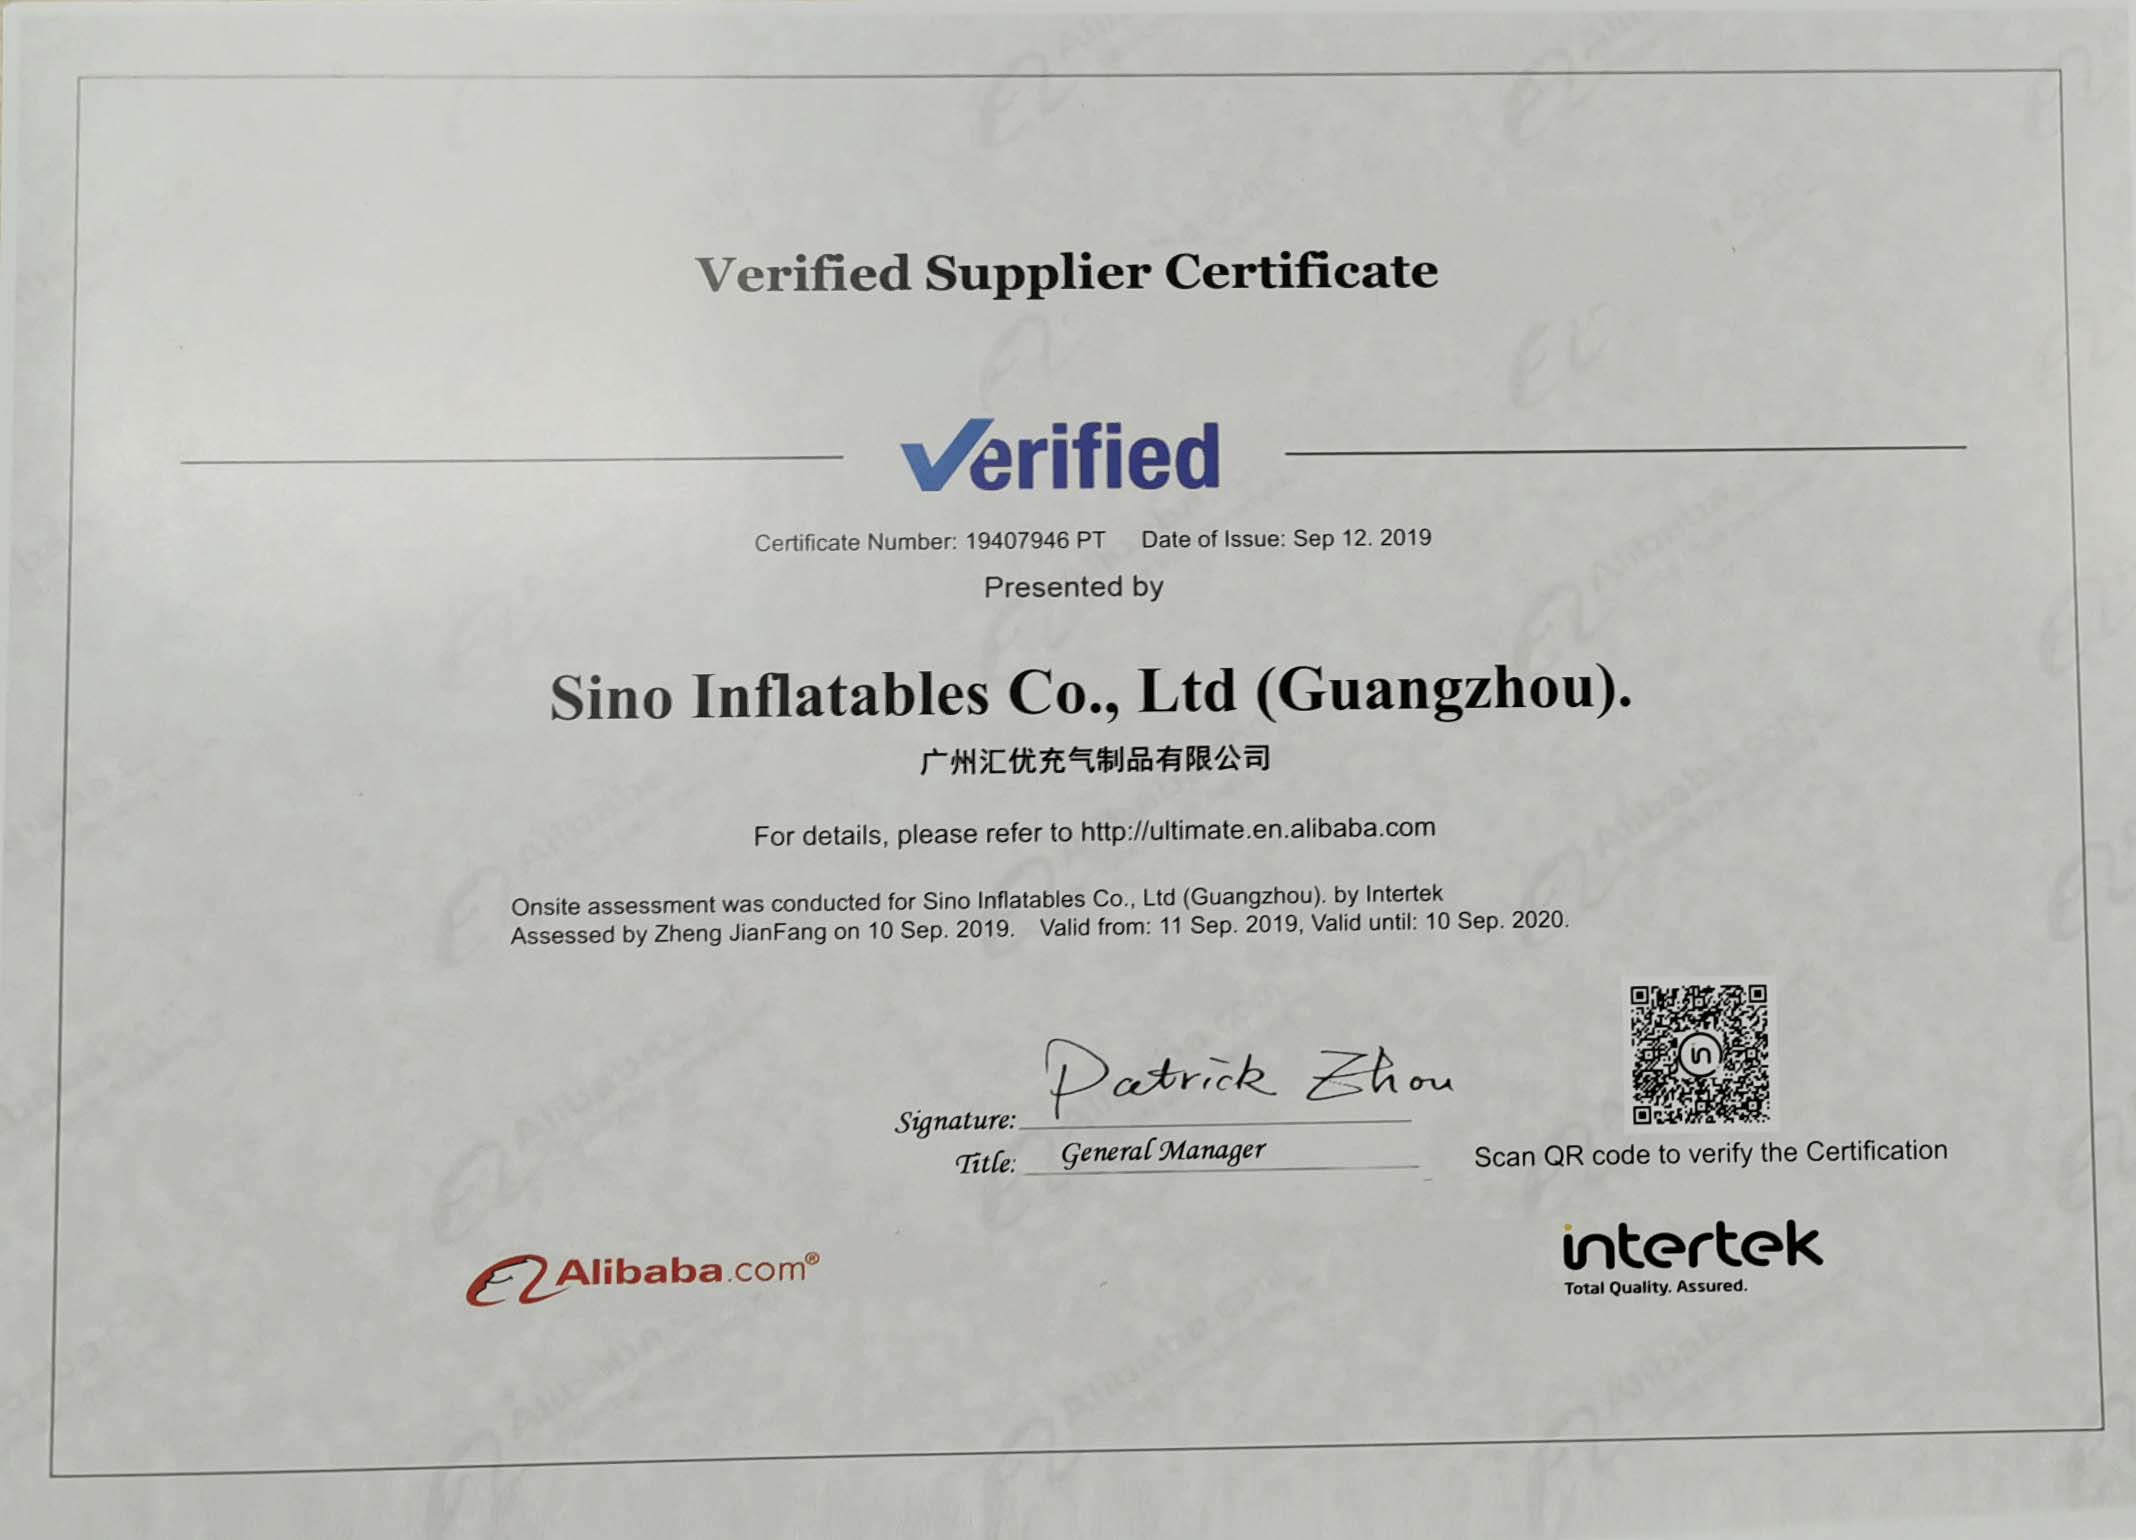 Sino inflatables has passed the system certification audit of Inertek.